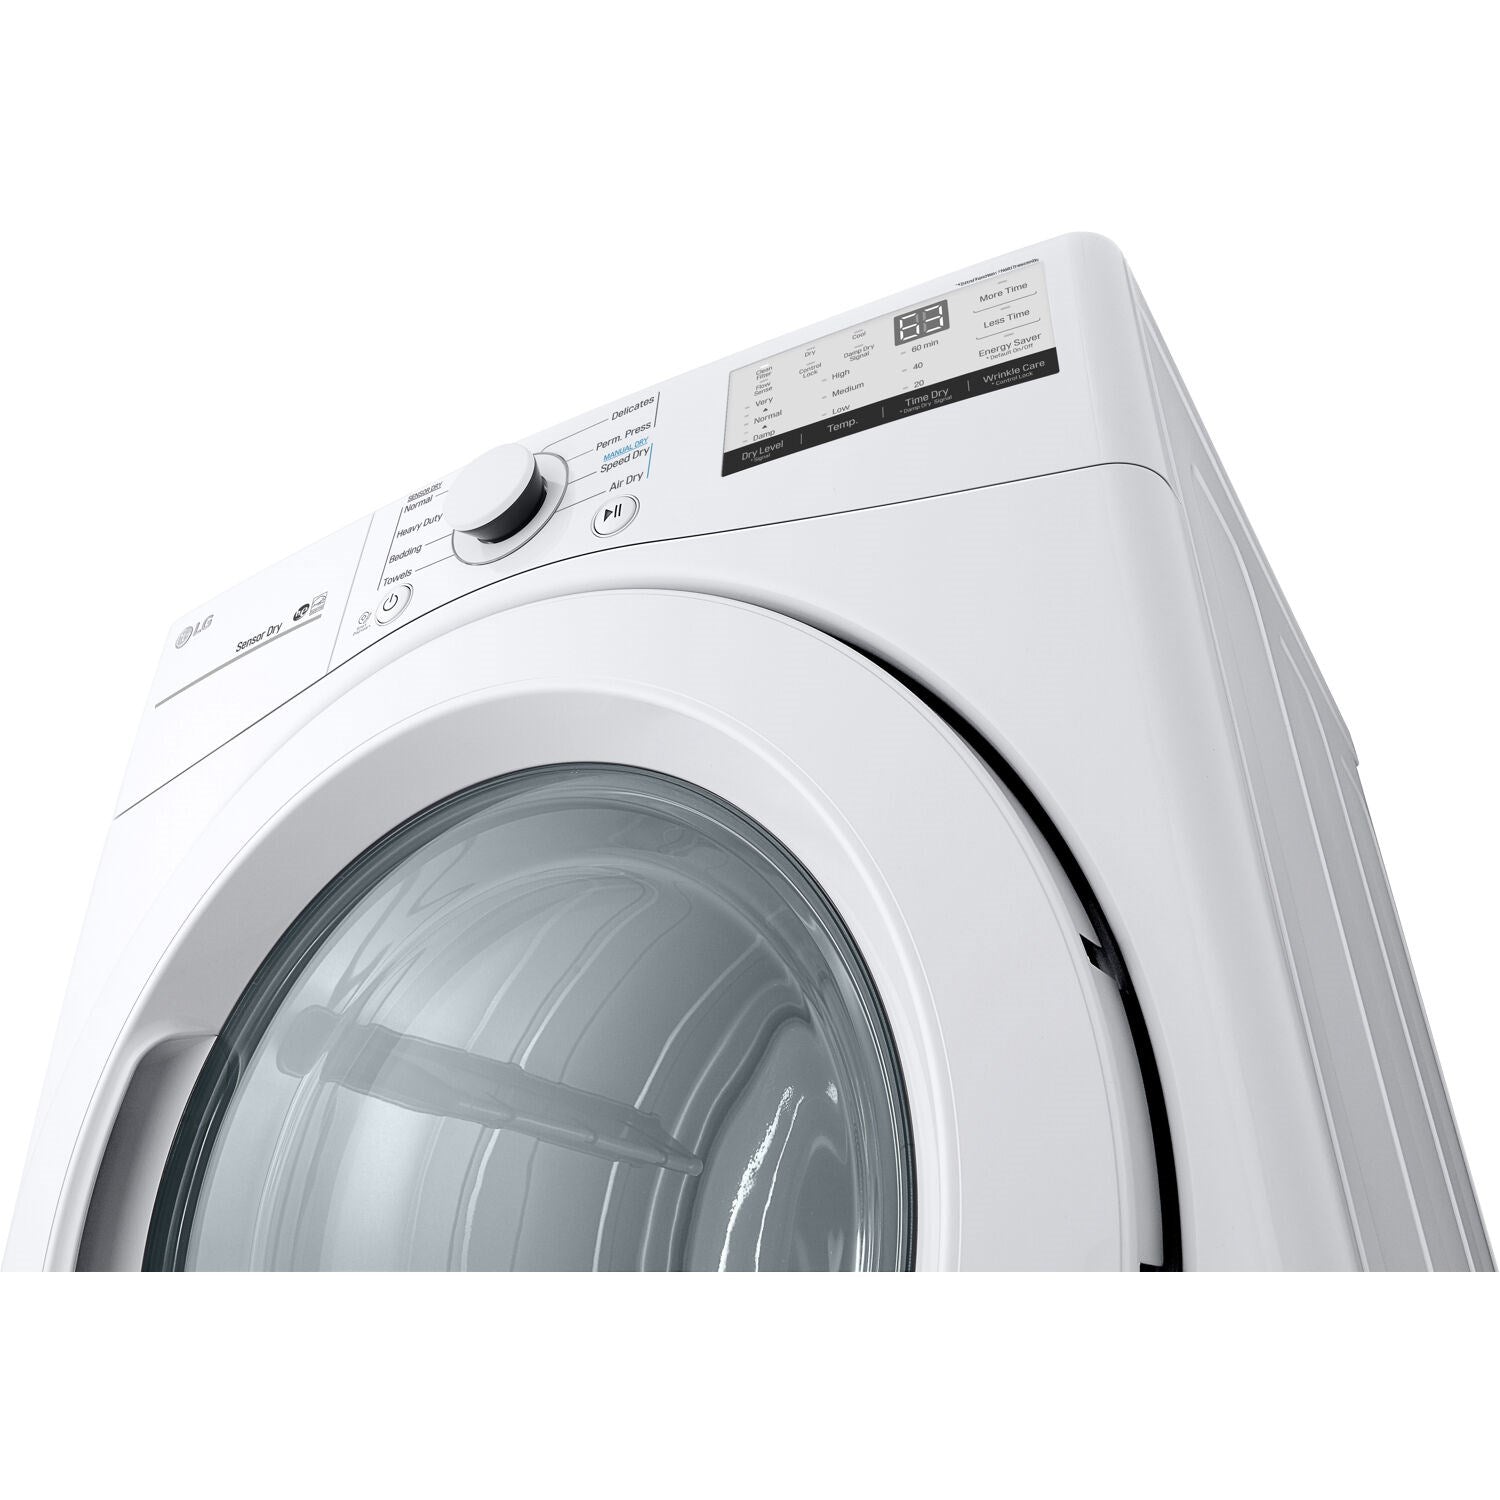 LG - 7.4 cu. ft. Vented Smart Electric Dryer with Sensor Dry in White | DLE3400W